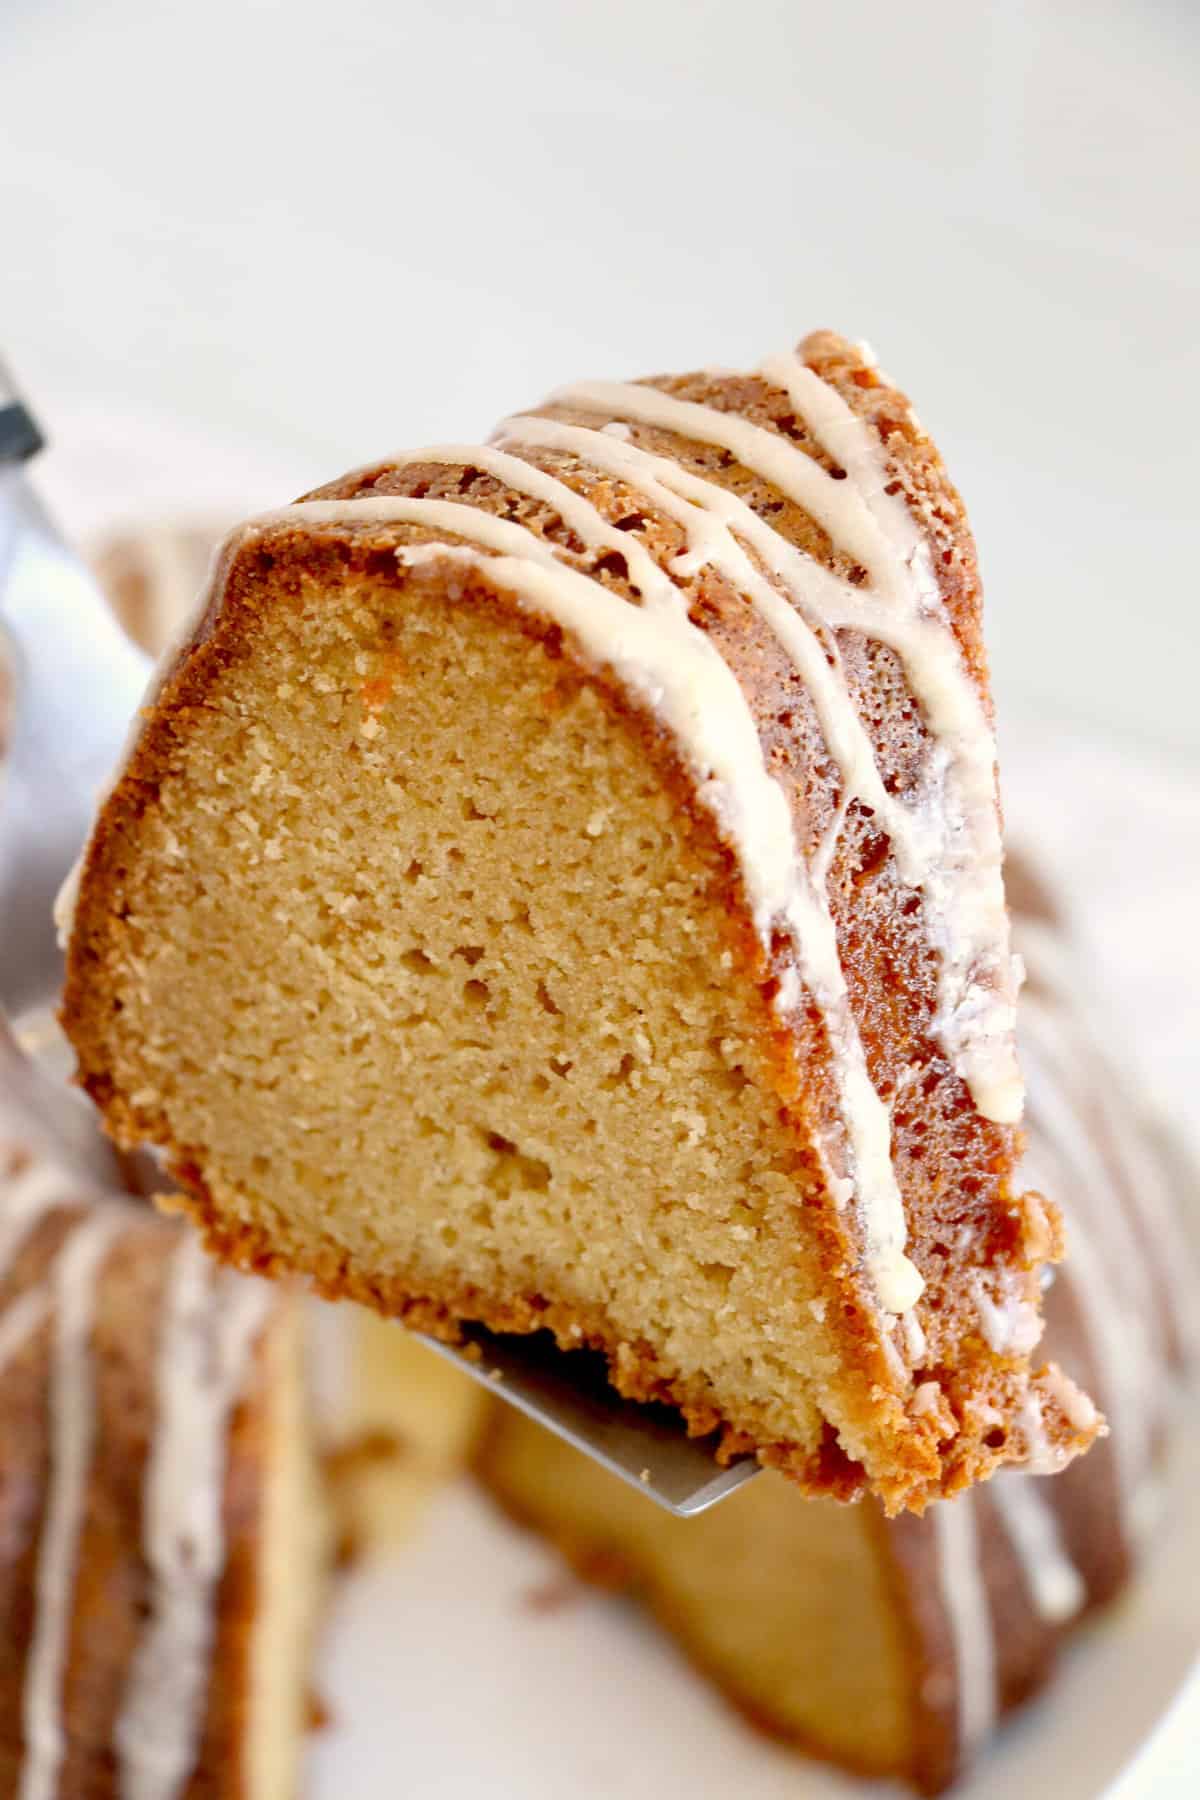 A slice of pound cake is being lifted from the rest of the cake.